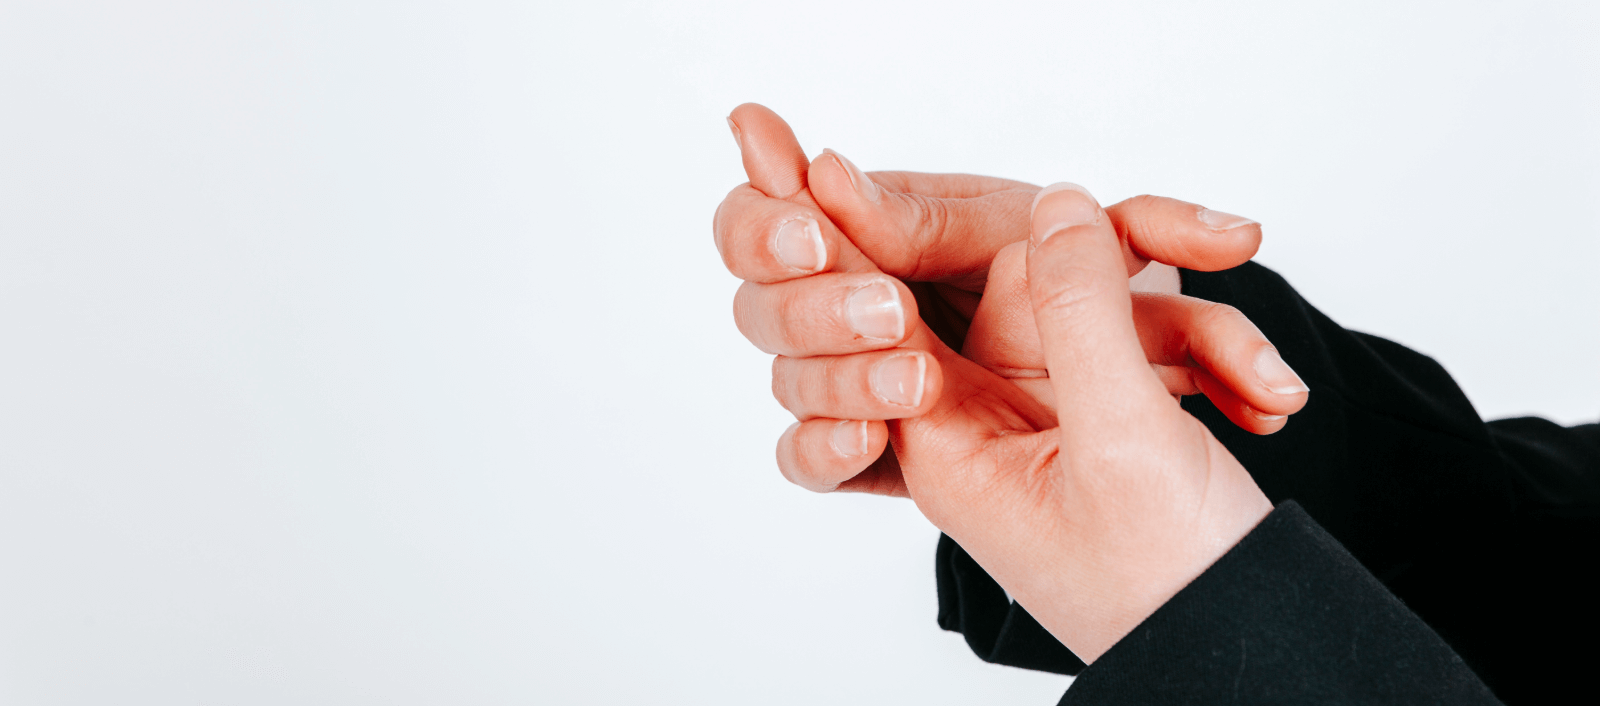 can you move your index finger without moving your thumb